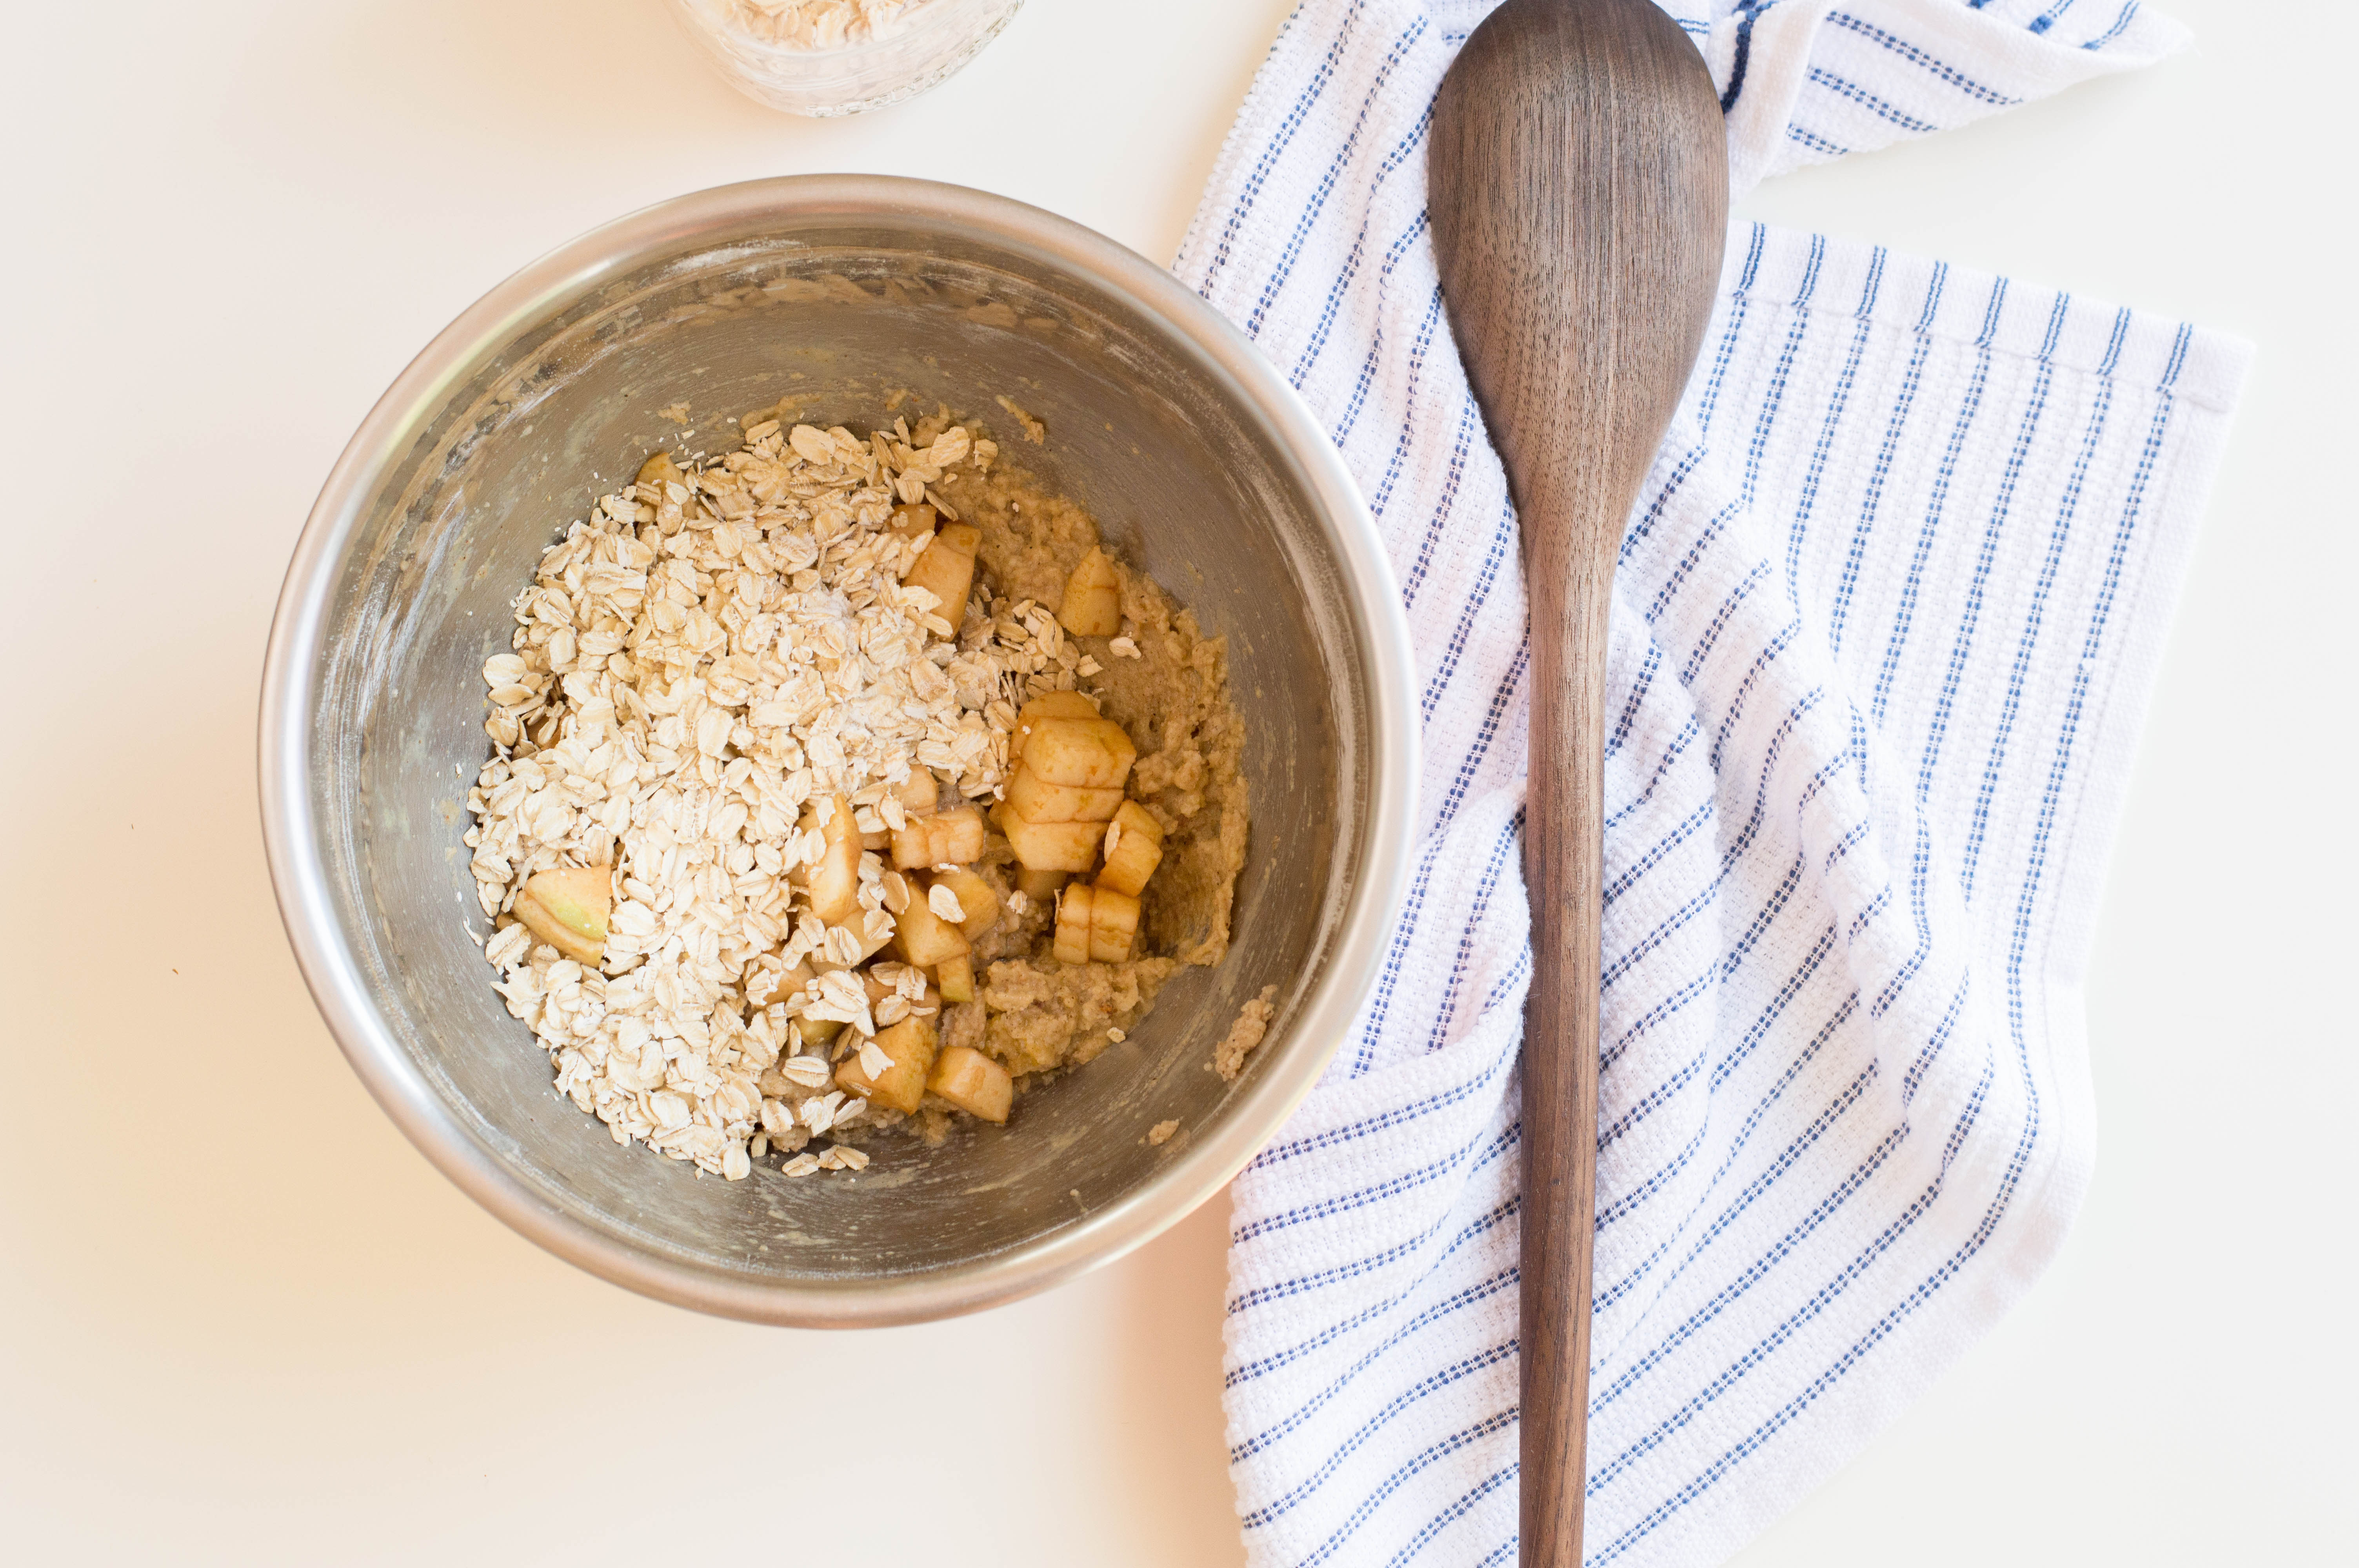 Mix the dry ingredients with your fresh diced apple for this Apple Oatmeal Cookie Recipe